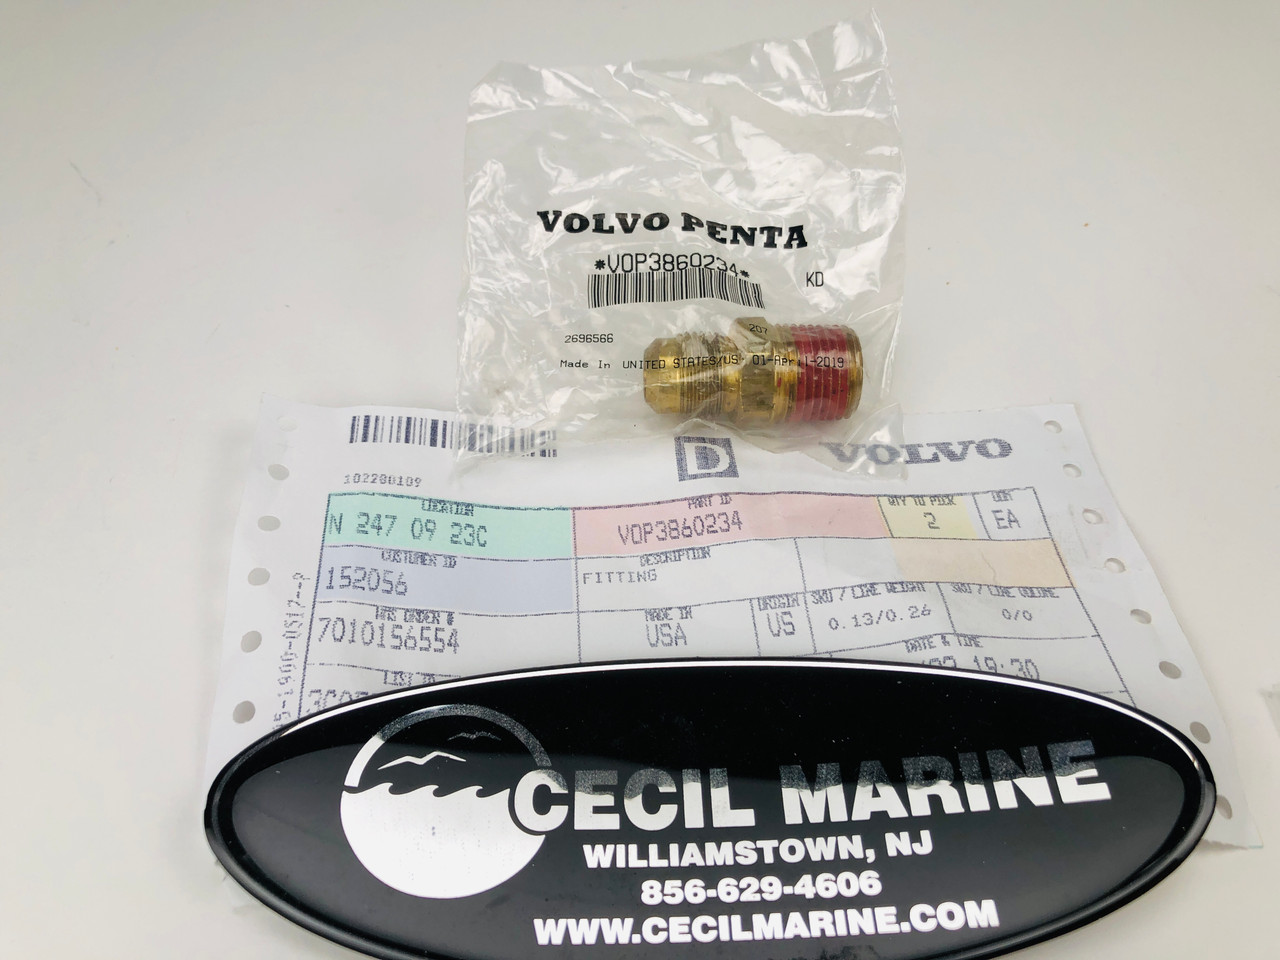 $29.99* GENUINE VOLVO no tax* FITTING 3860234  *In Stock & Ready To Ship!